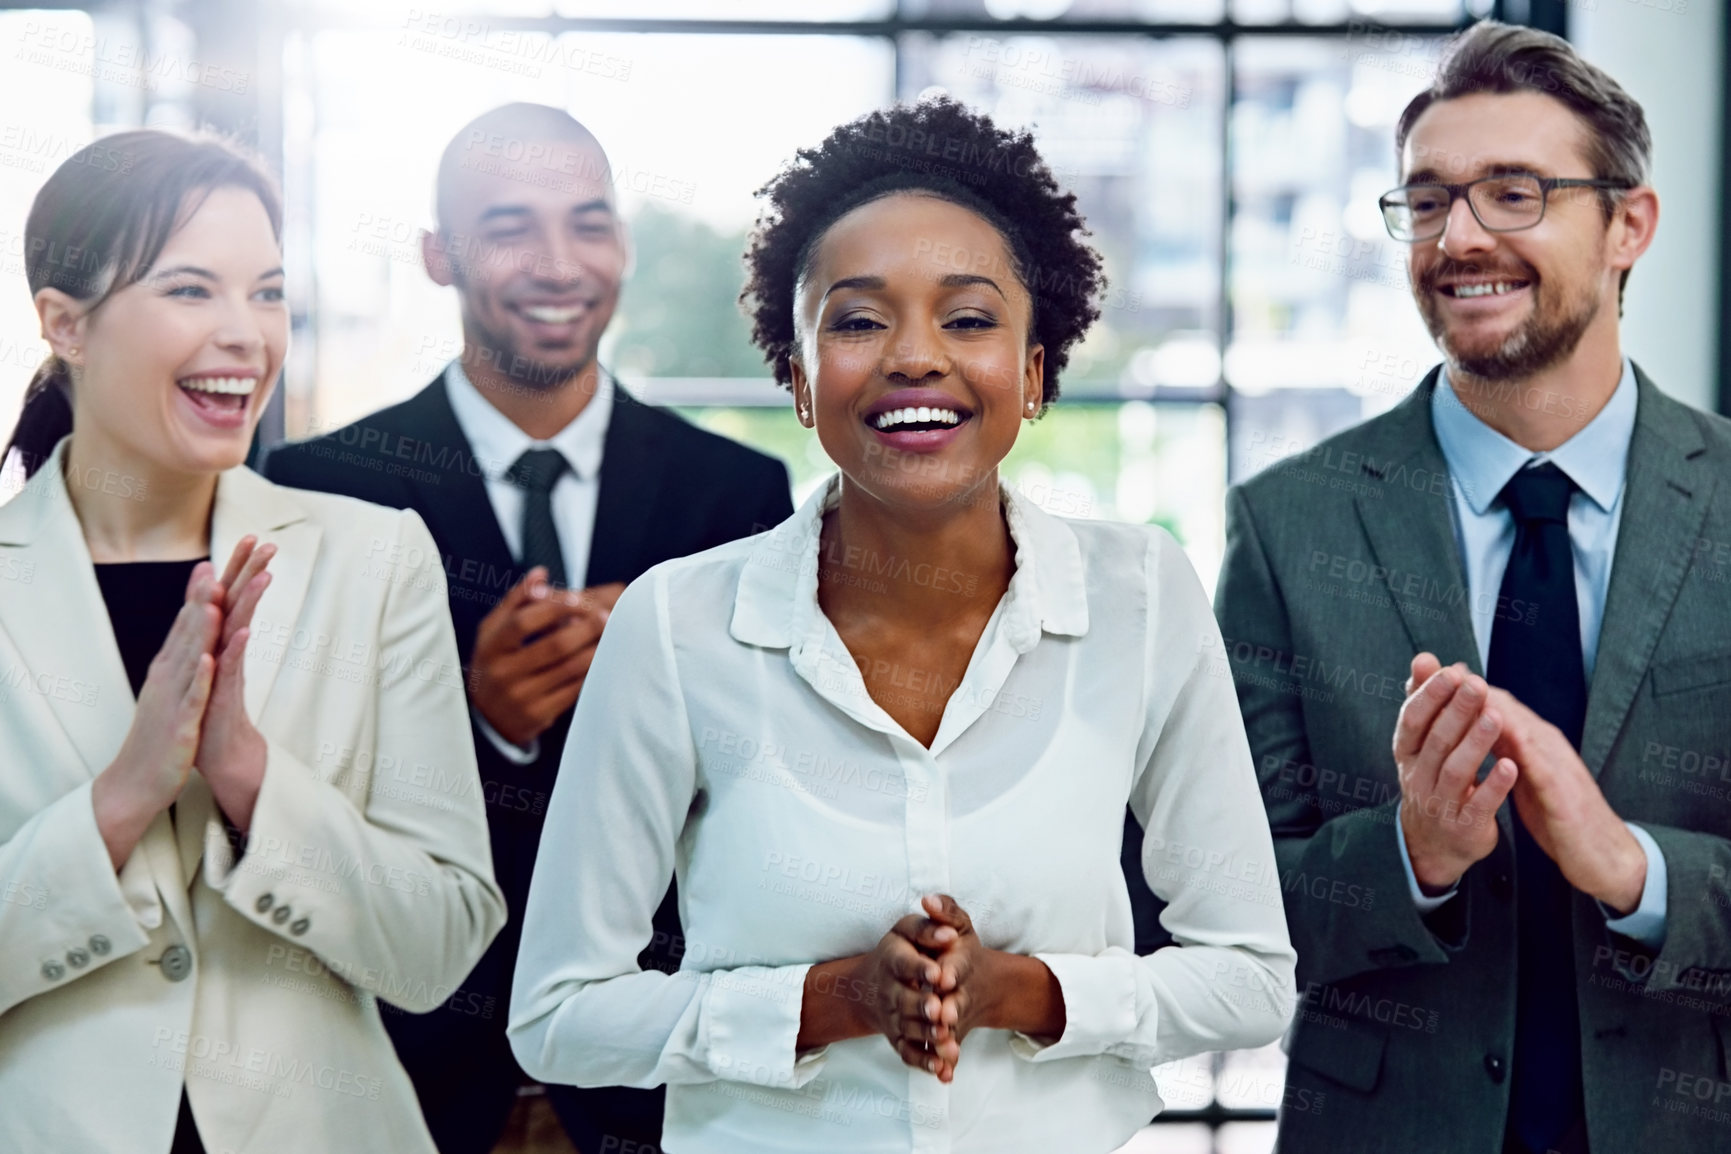 Buy stock photo Applause, portrait and business woman with team in office for good news, achievement or goal. Happy, gratitude and group of financial advisors clapping hands for celebration with person in workplace.